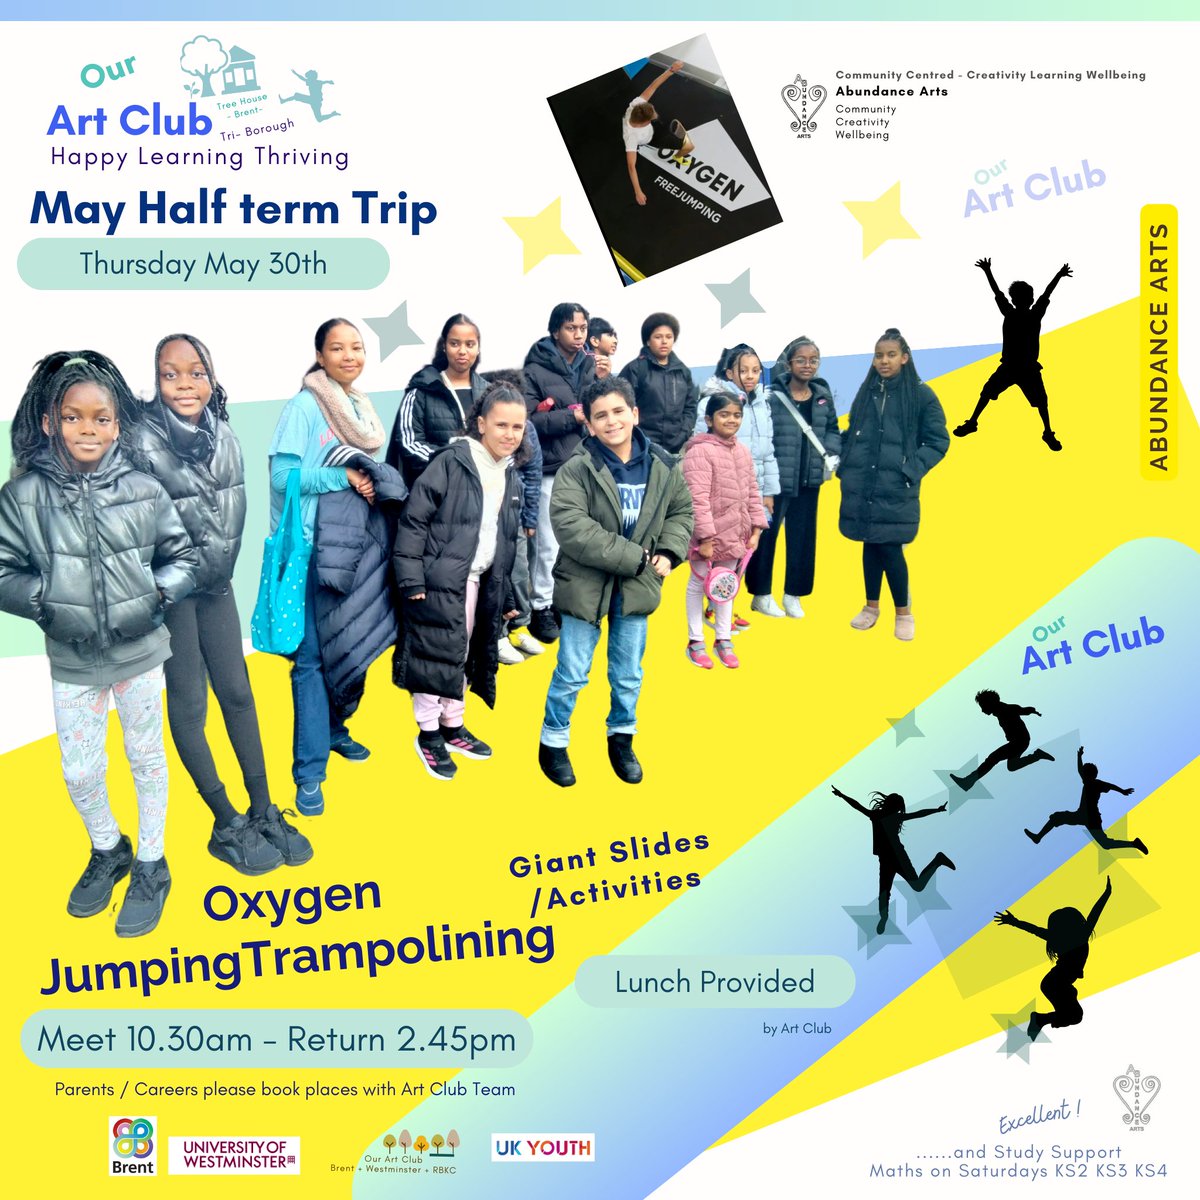 ✨✌🏼😊😎 our Art Club..fun, learning, fitness - Oxygen Trampoline Park ✨💛
We added a  second date!
 #walkThisMay #community #youth
#MomentsForMovement

'It is energetic, I like all the different activities' 💫

'Fun fun &  fun'✨

'I'm glad he can volunteer & helps others'⭐